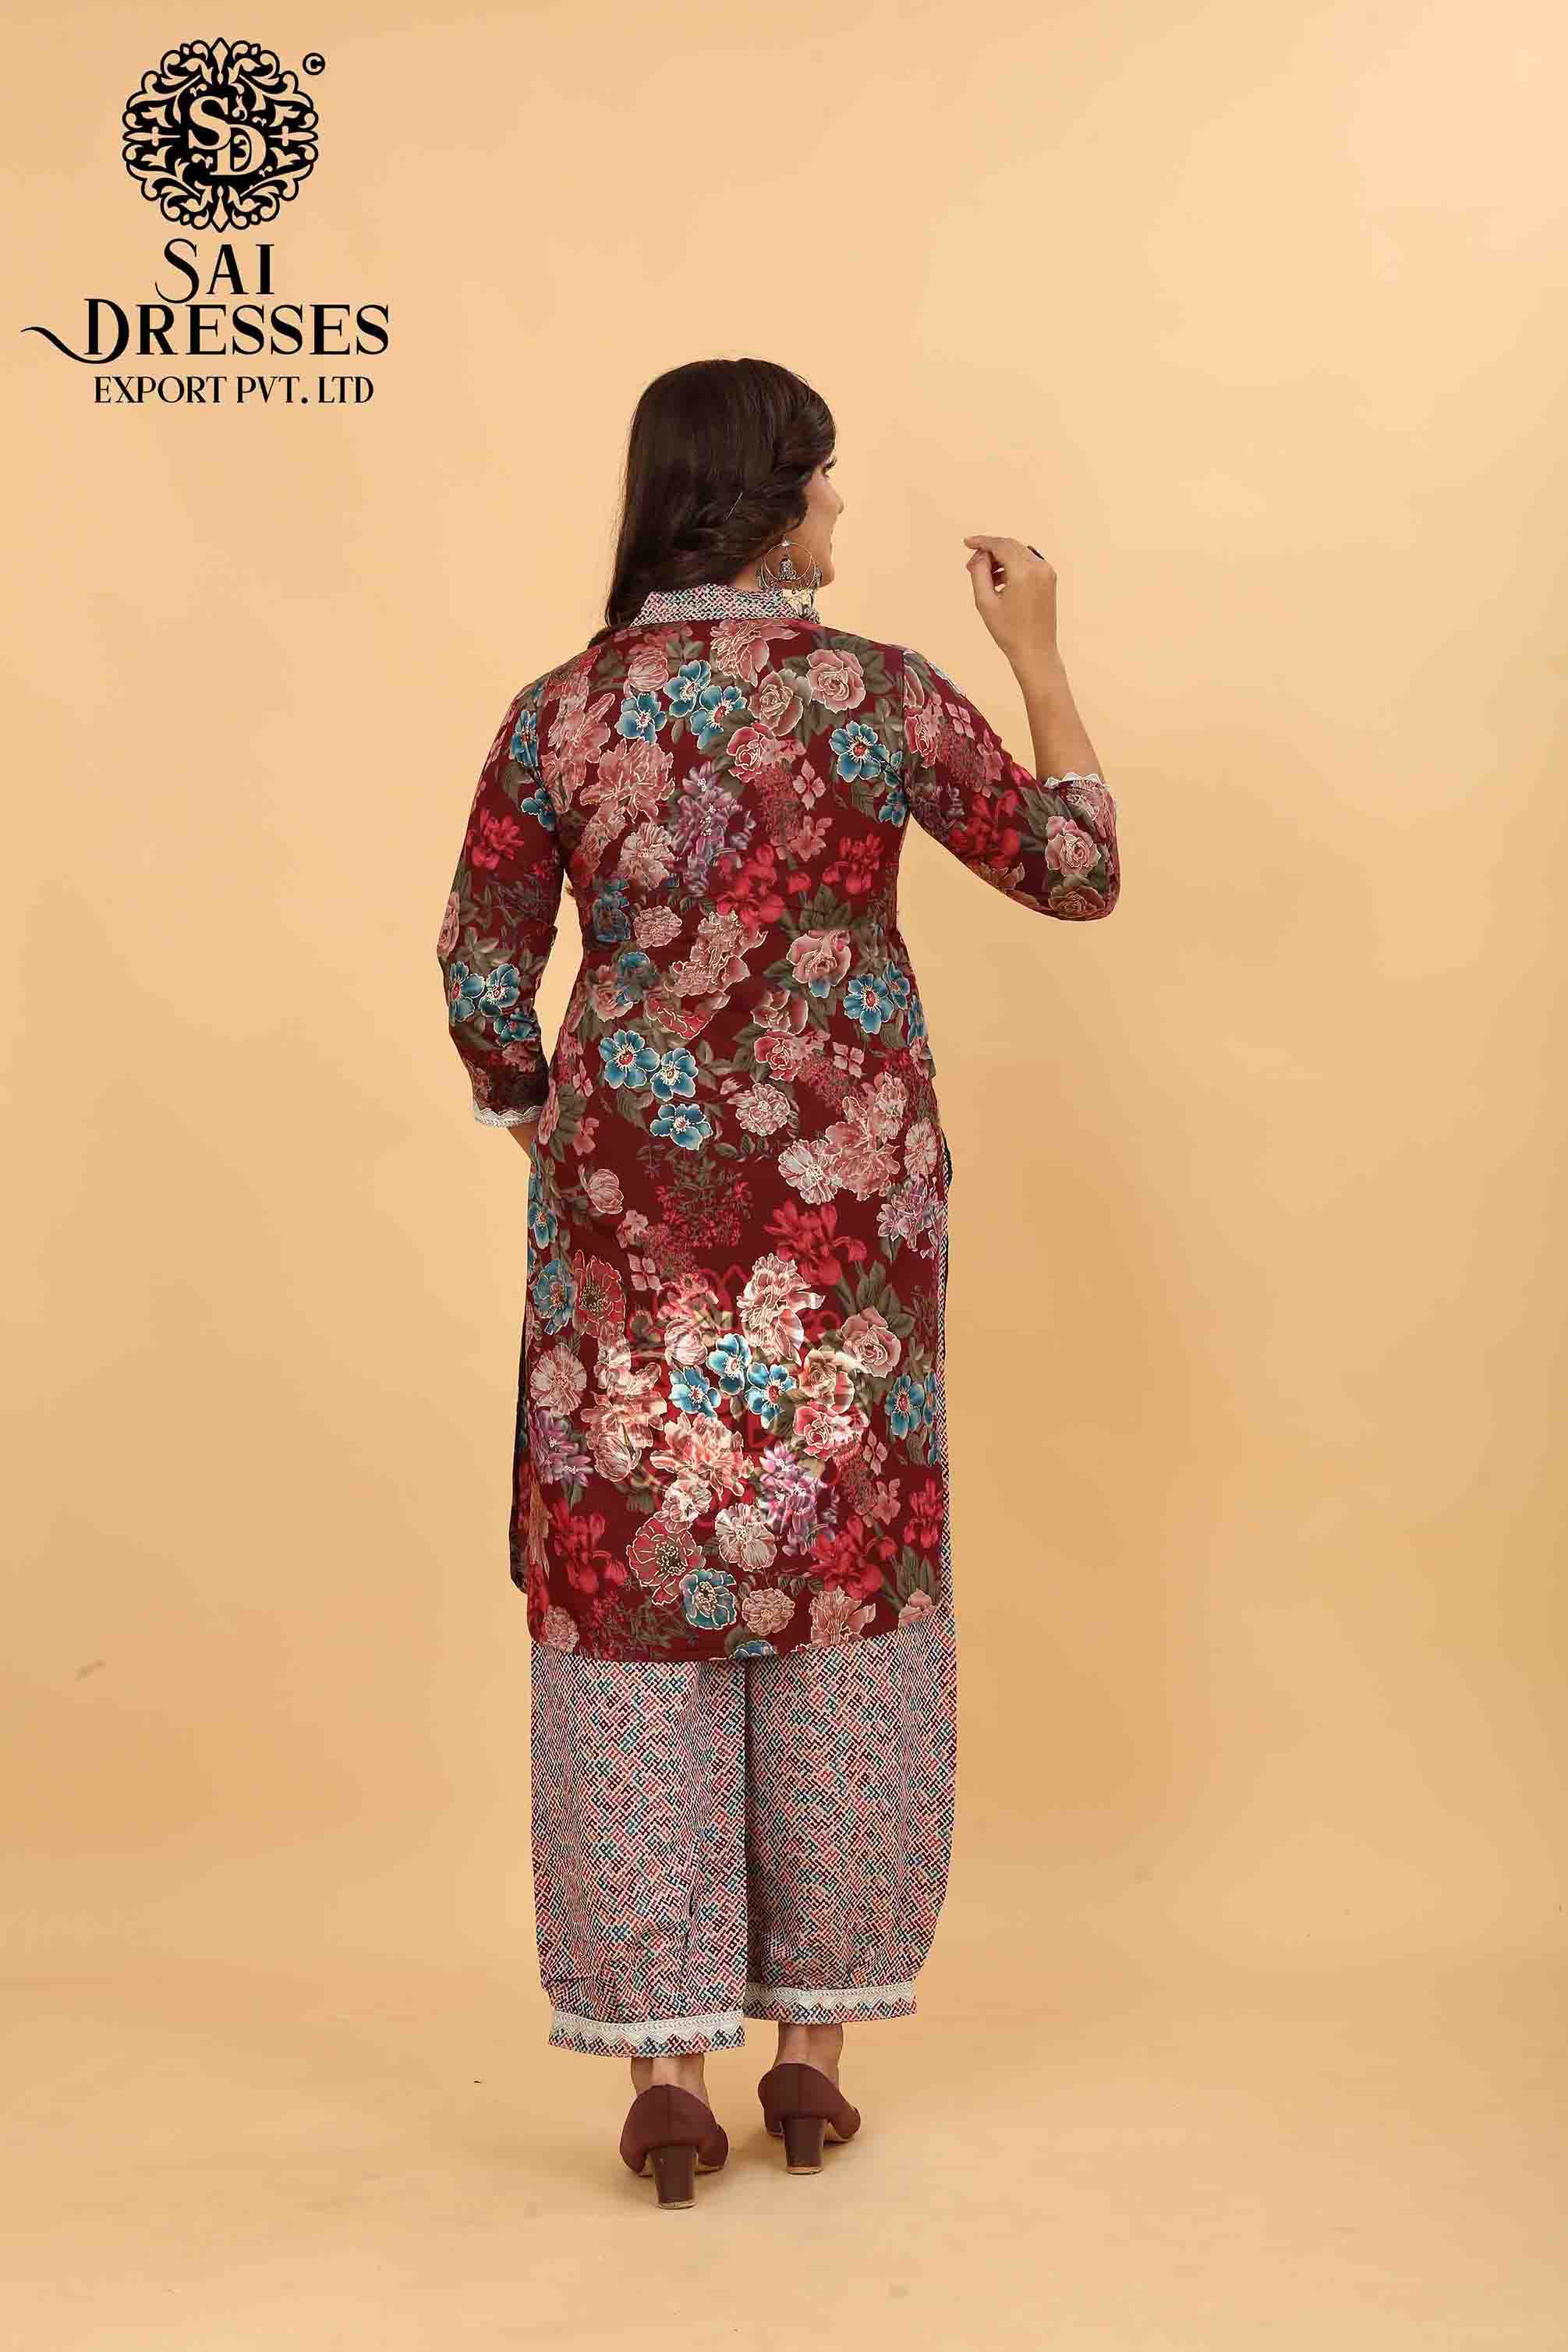 SAI DRESSES PRESENT D.NO SD 5009 READY TO EXCLUSIVE TRENDY WEAR PATHANI KURTA WITH AFGHANI PANT STYLE COMBO COLLECTION IN WHOLESALE RATE IN SURAT